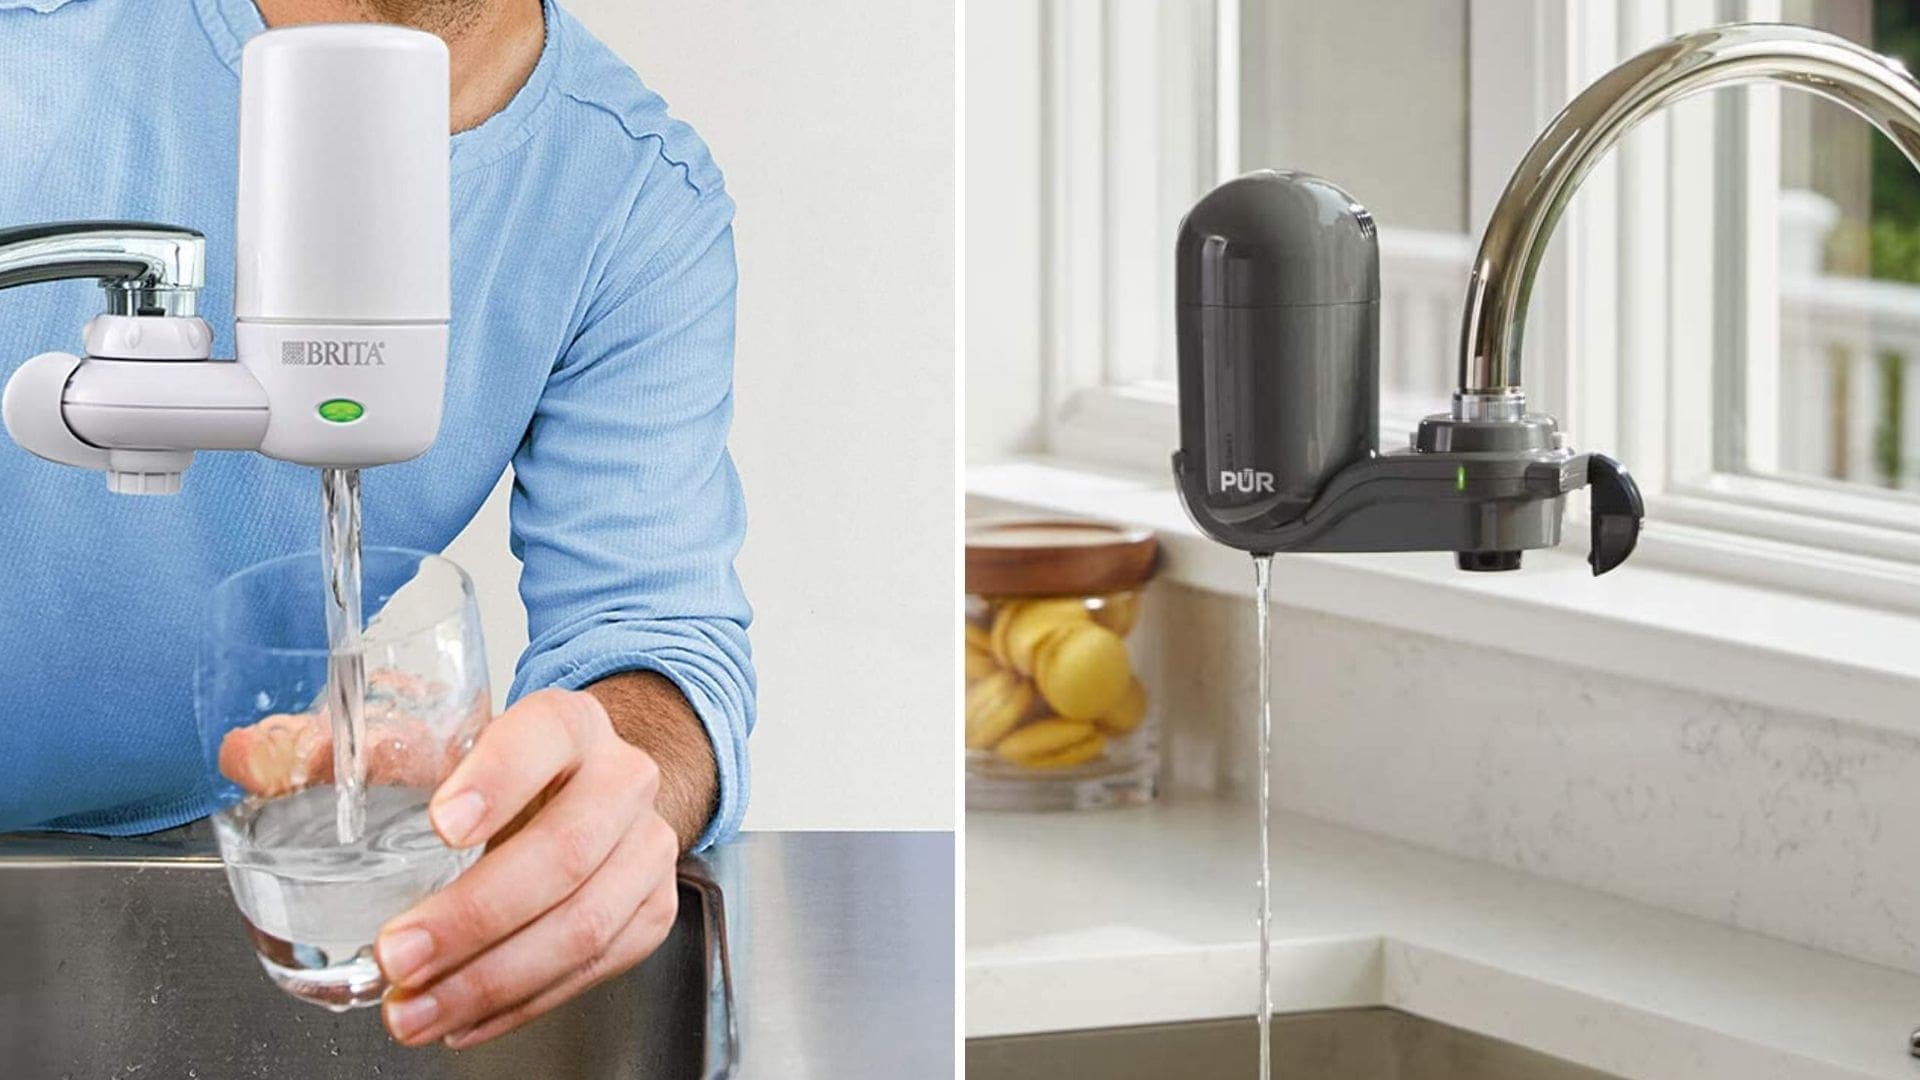 pur-vs-brita-which-water-faucet-filter-is-better-house-grail